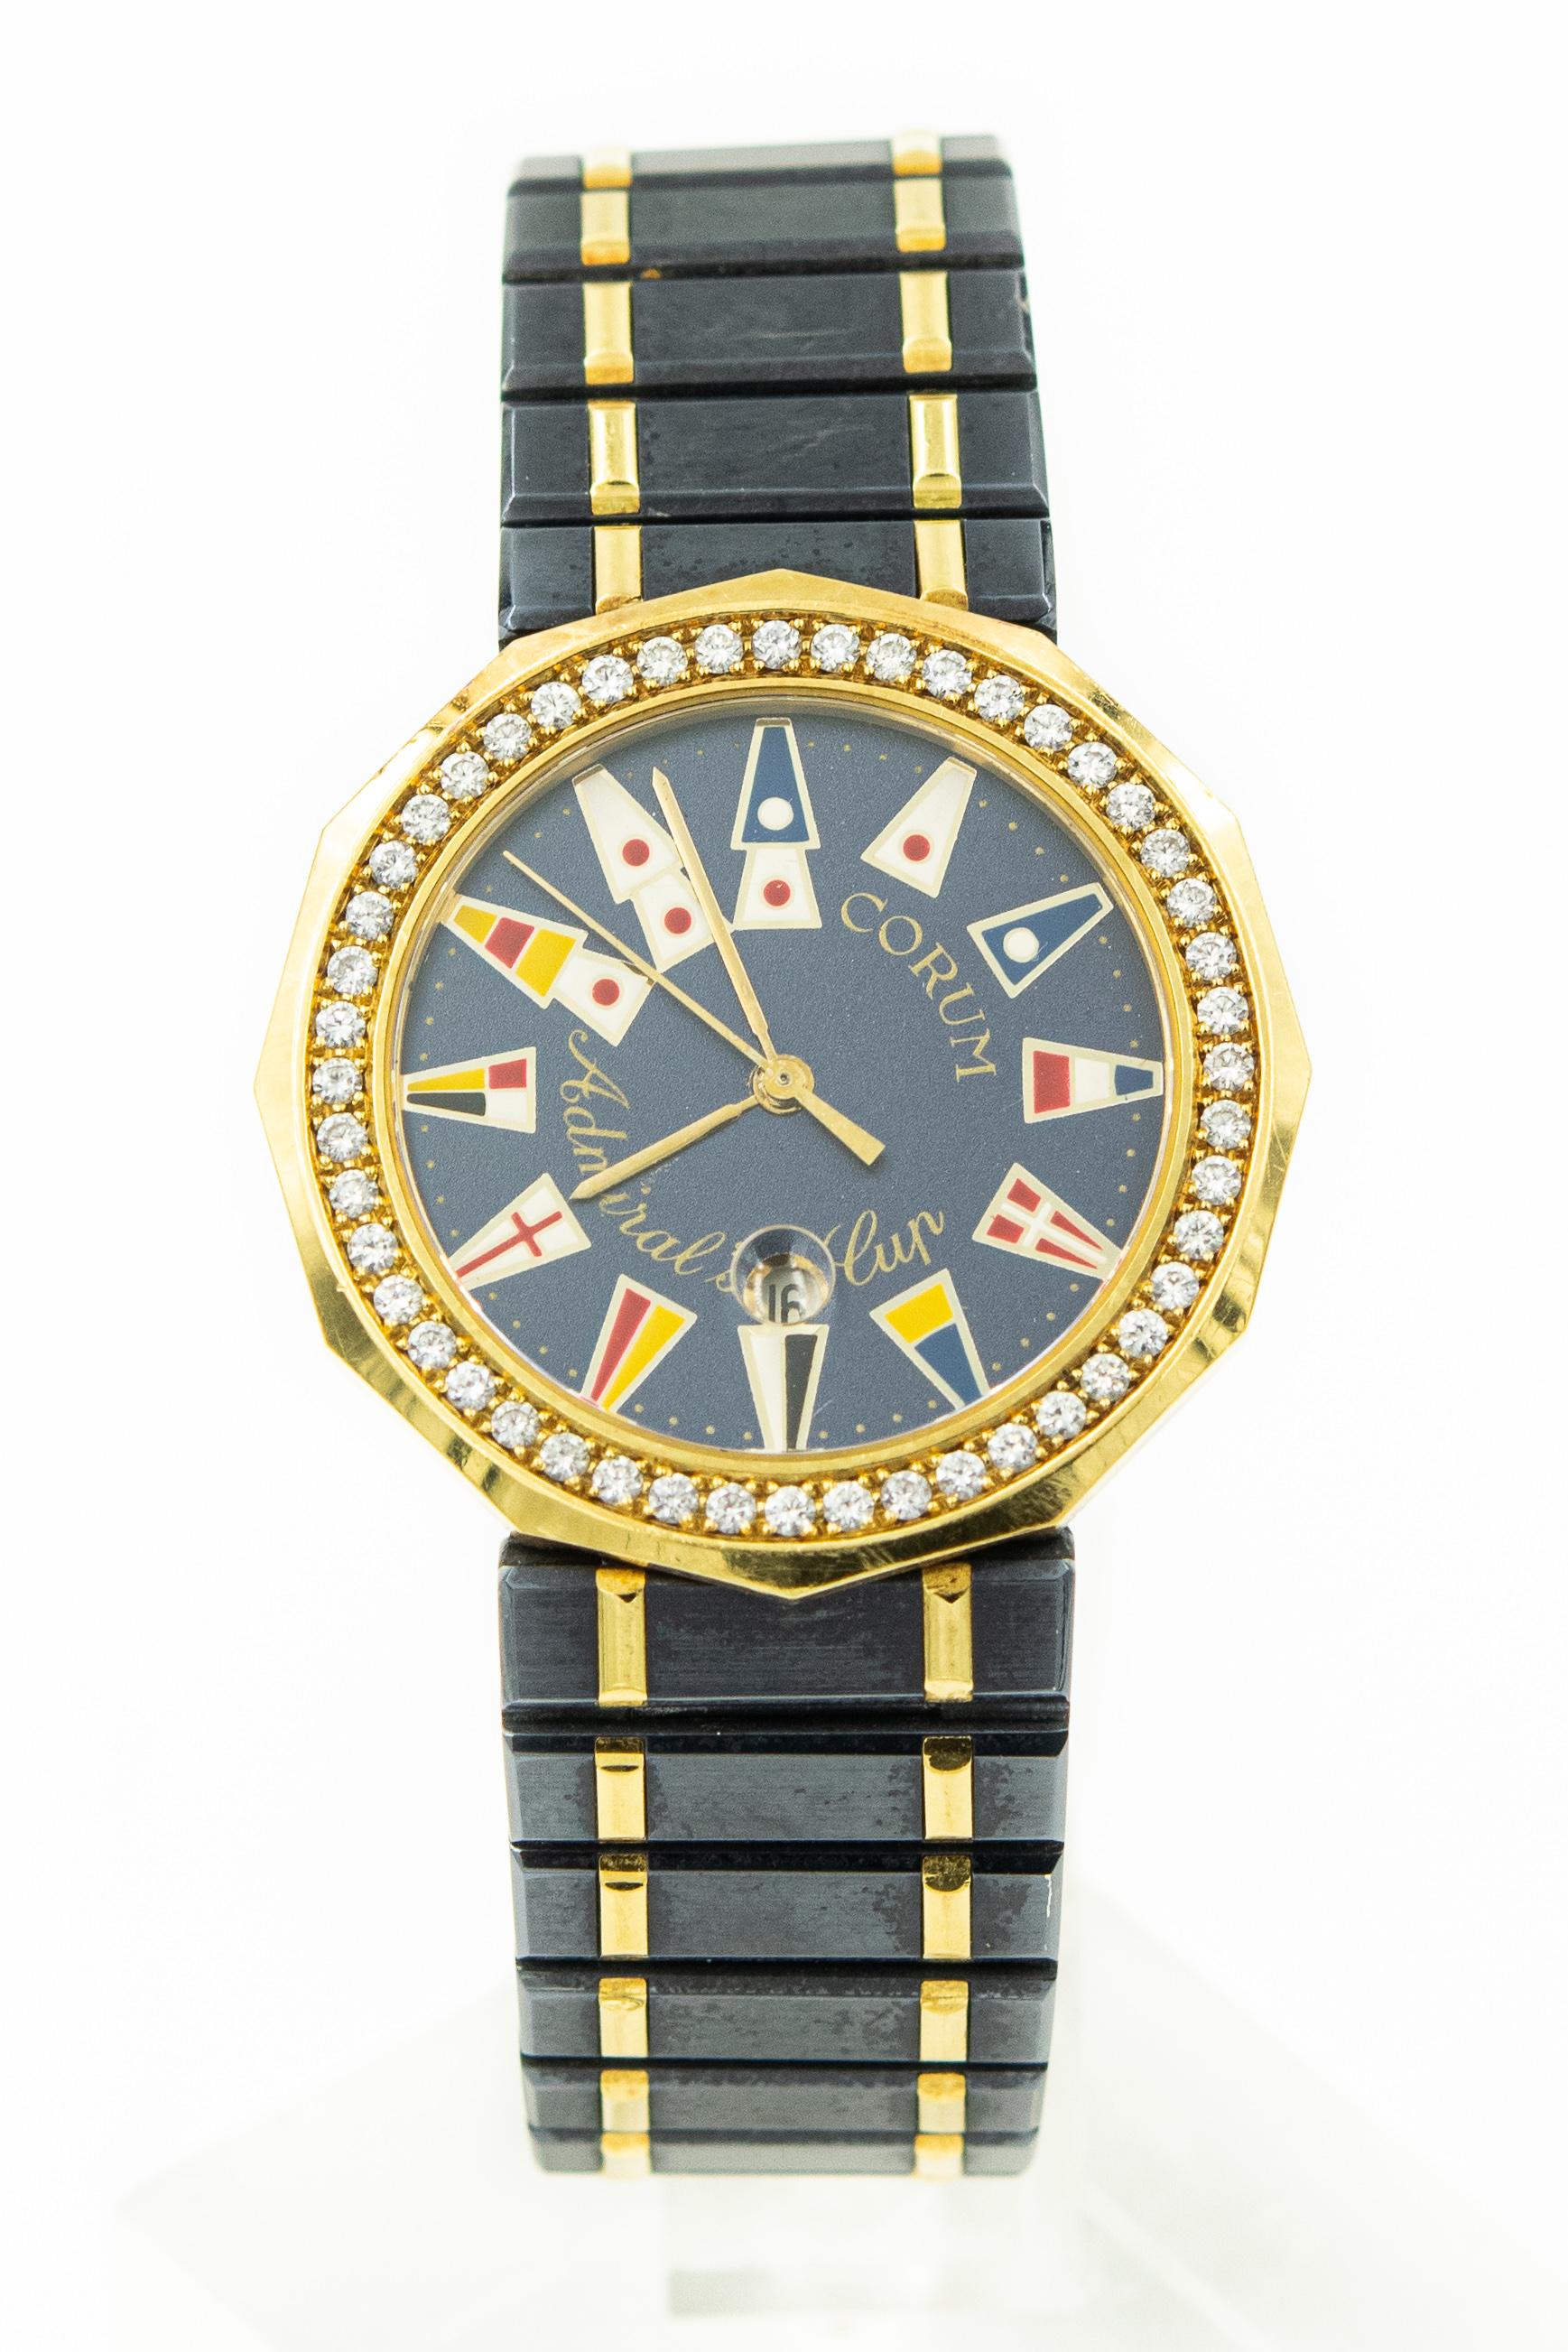 Men's Admiral's Cup Corum Watch 
Reference Number: 39.812.33V52 Serial # 425239
12-sided 34 mm case and maritime pennants on the dial. Crafted in polished 18kt yellow gold and blue ceramic with an integral bracelet that finishes with a deployment